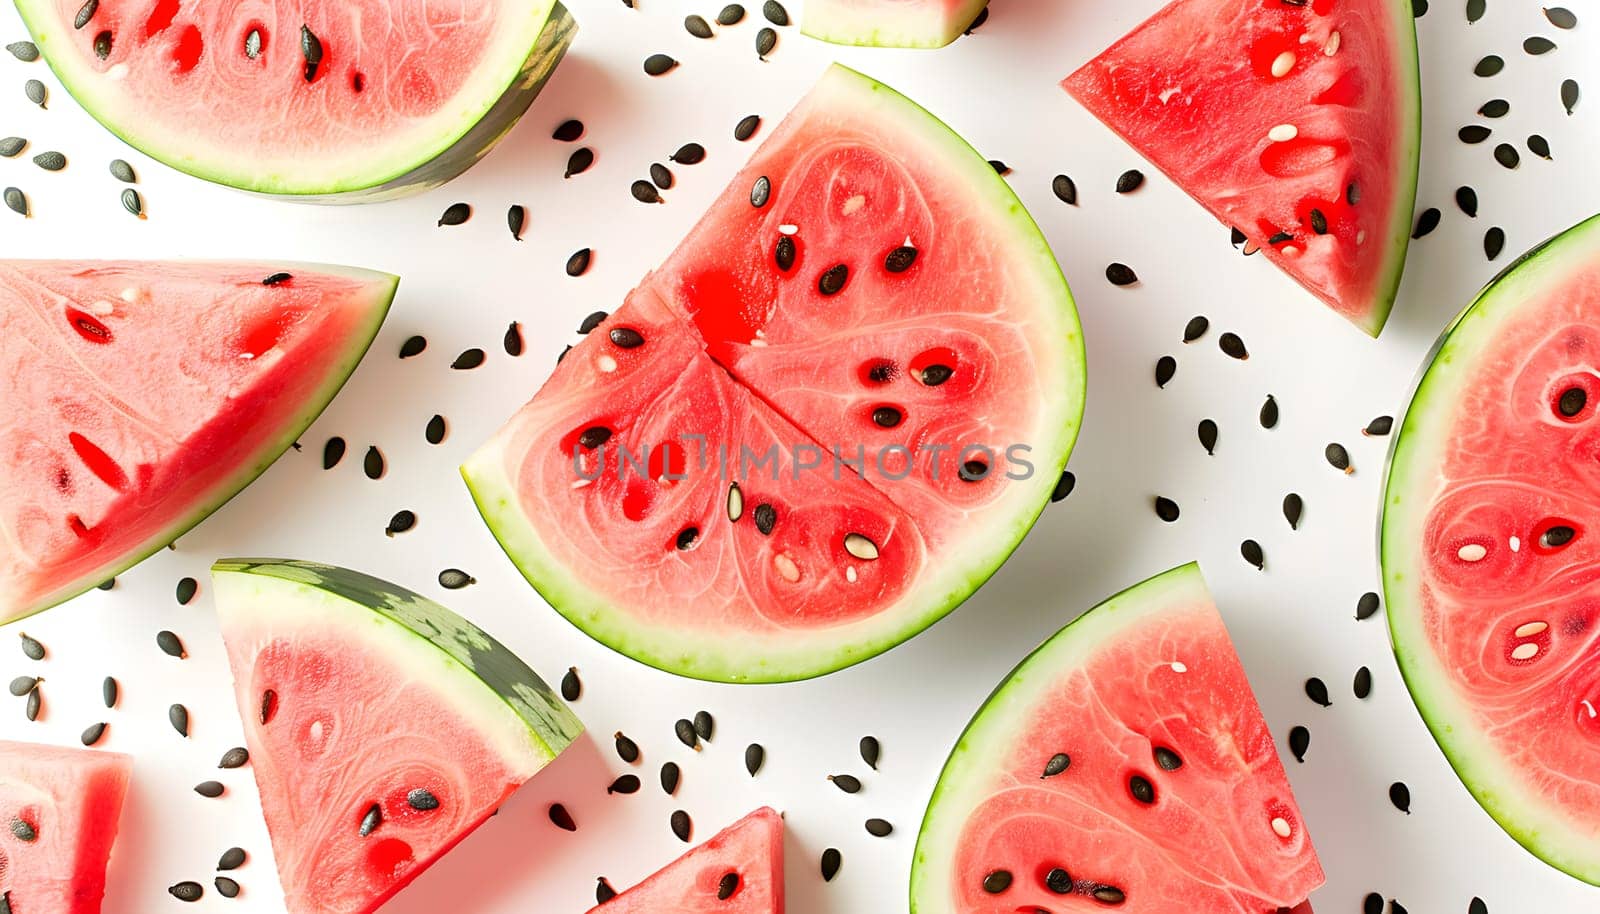 slices of watermelon on a white surface with black seeds by Nadtochiy